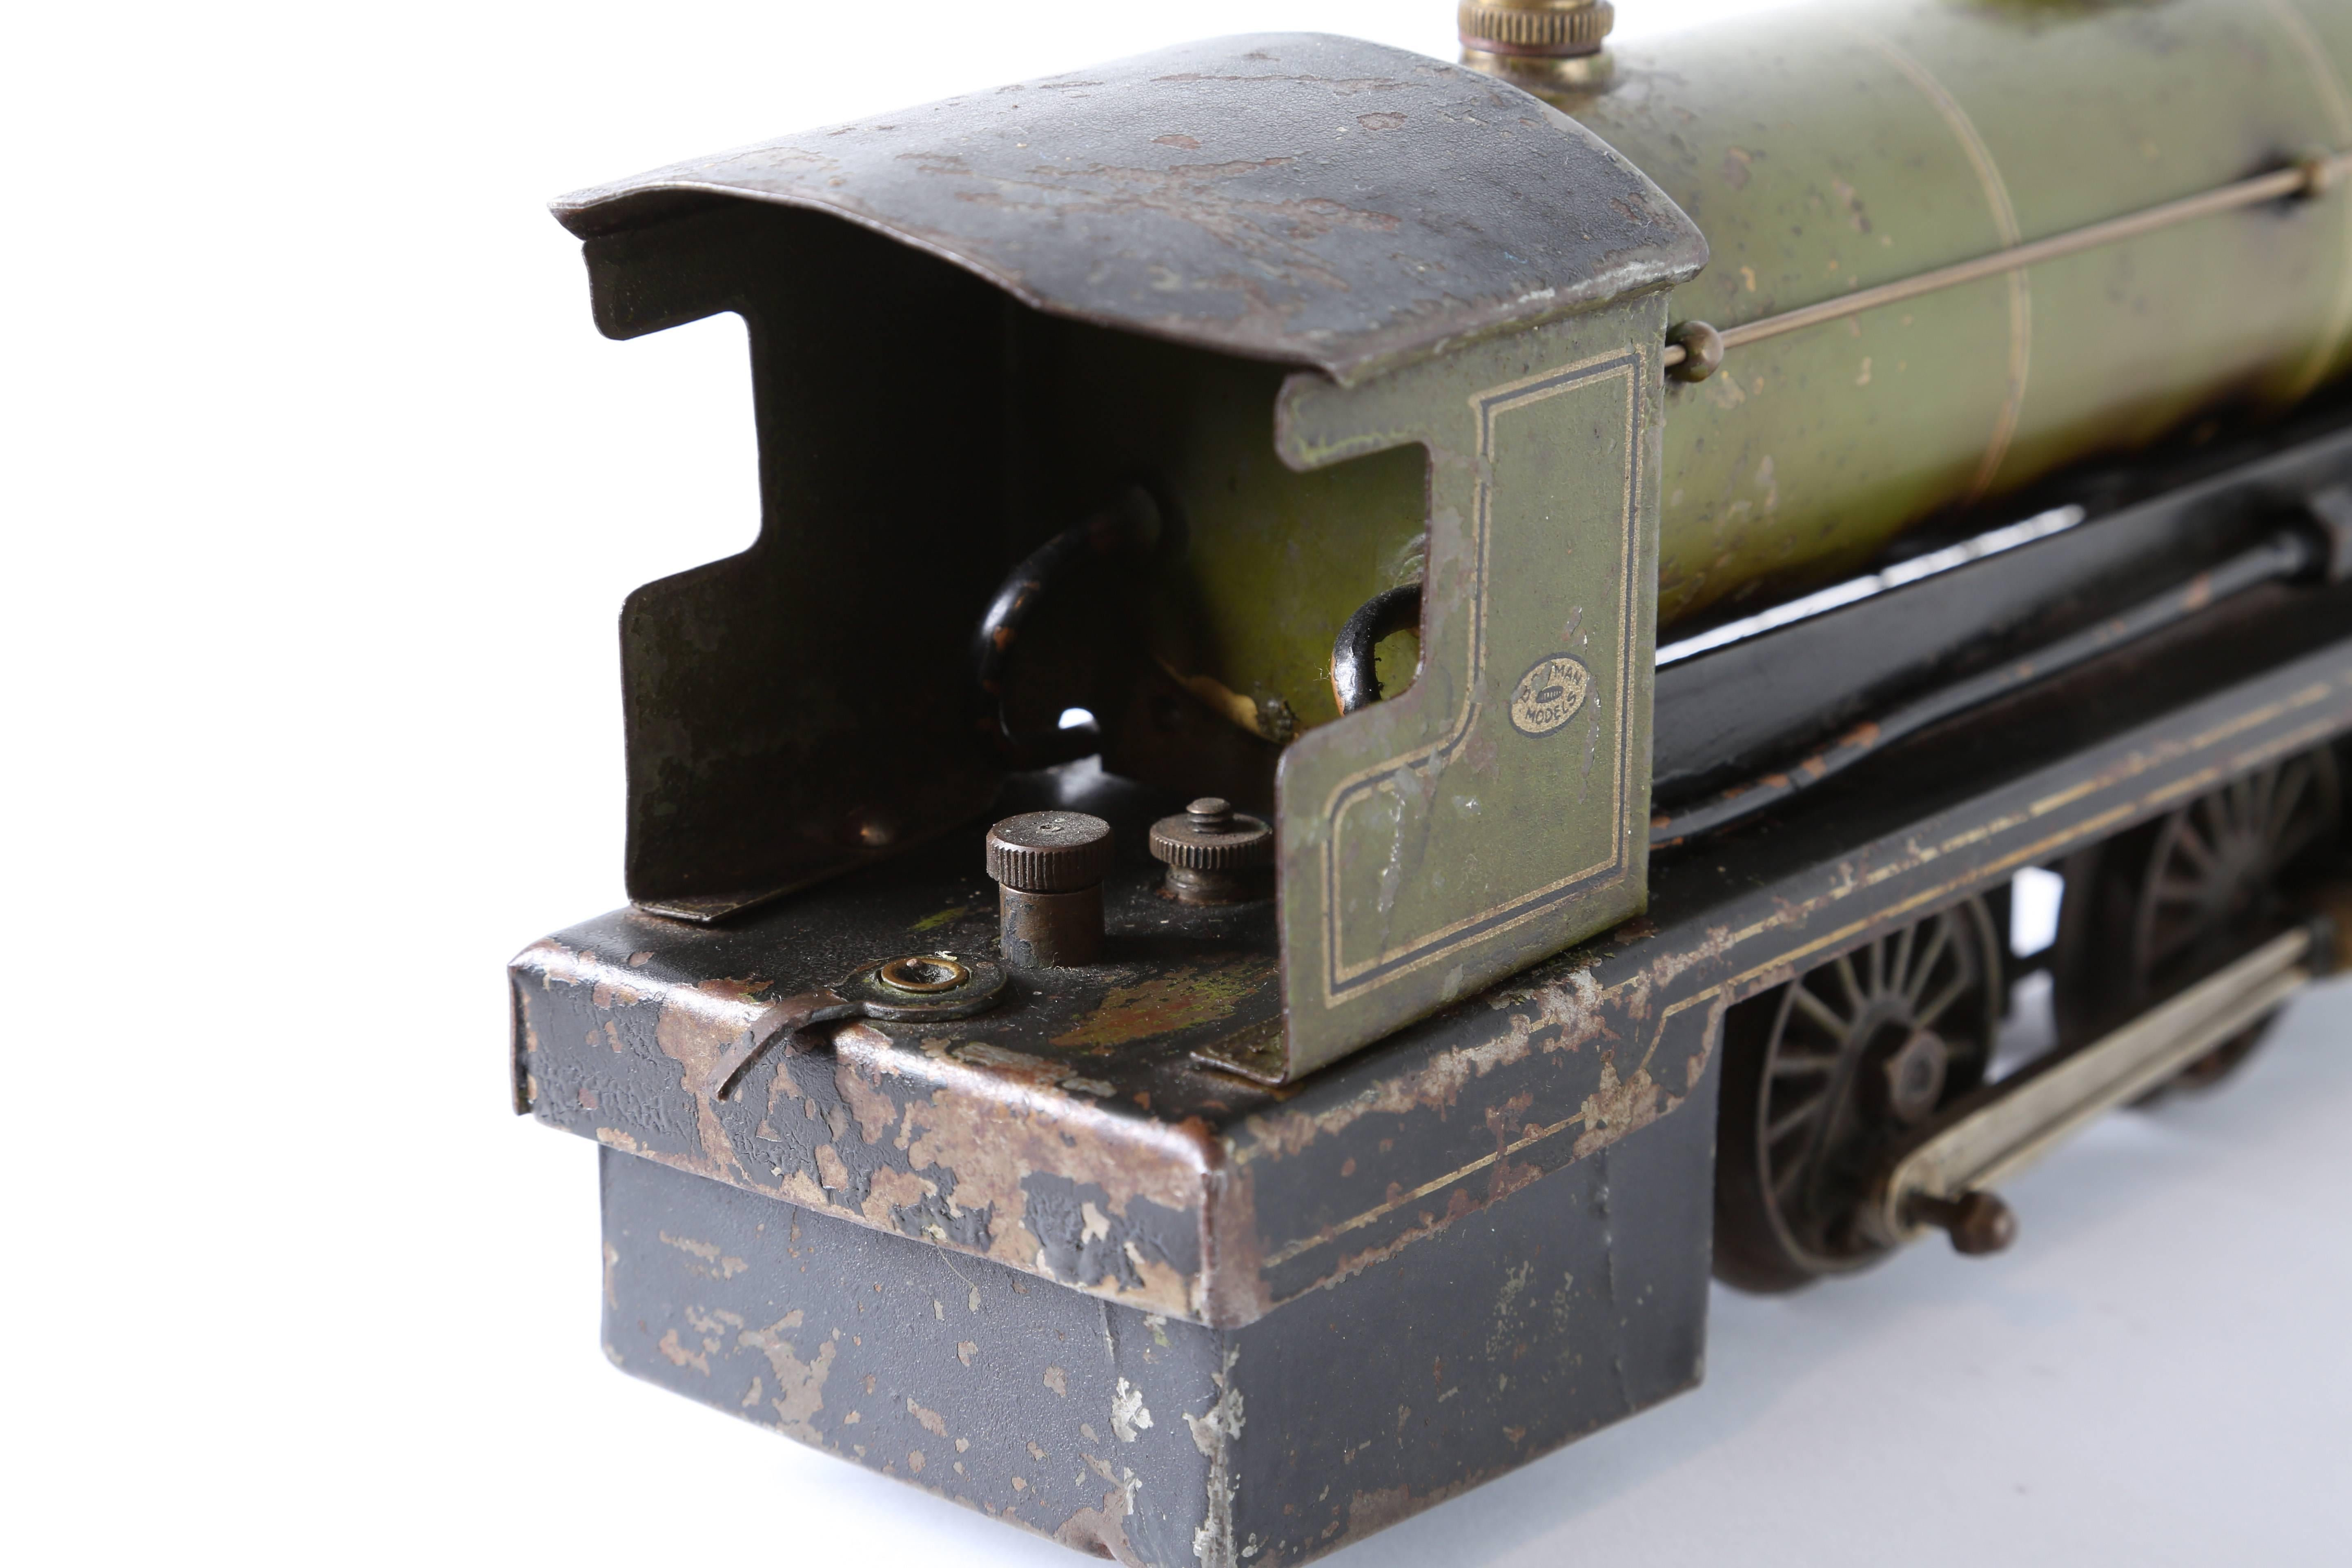 English Nice Vintage Steam Model Locomotive by Bowman For Sale